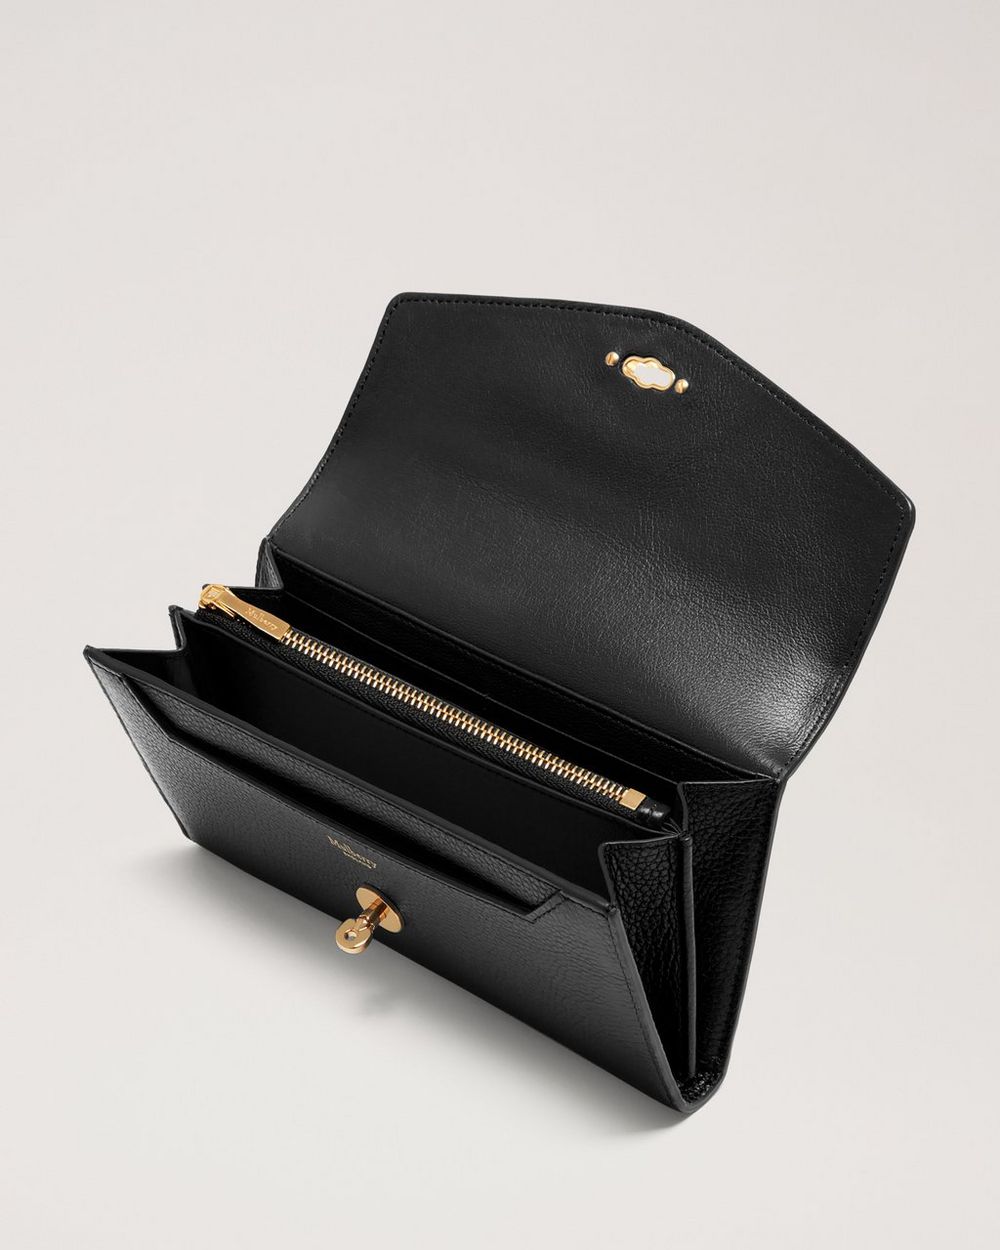 Mulberry Small Darley Leather Belt Bag in Black